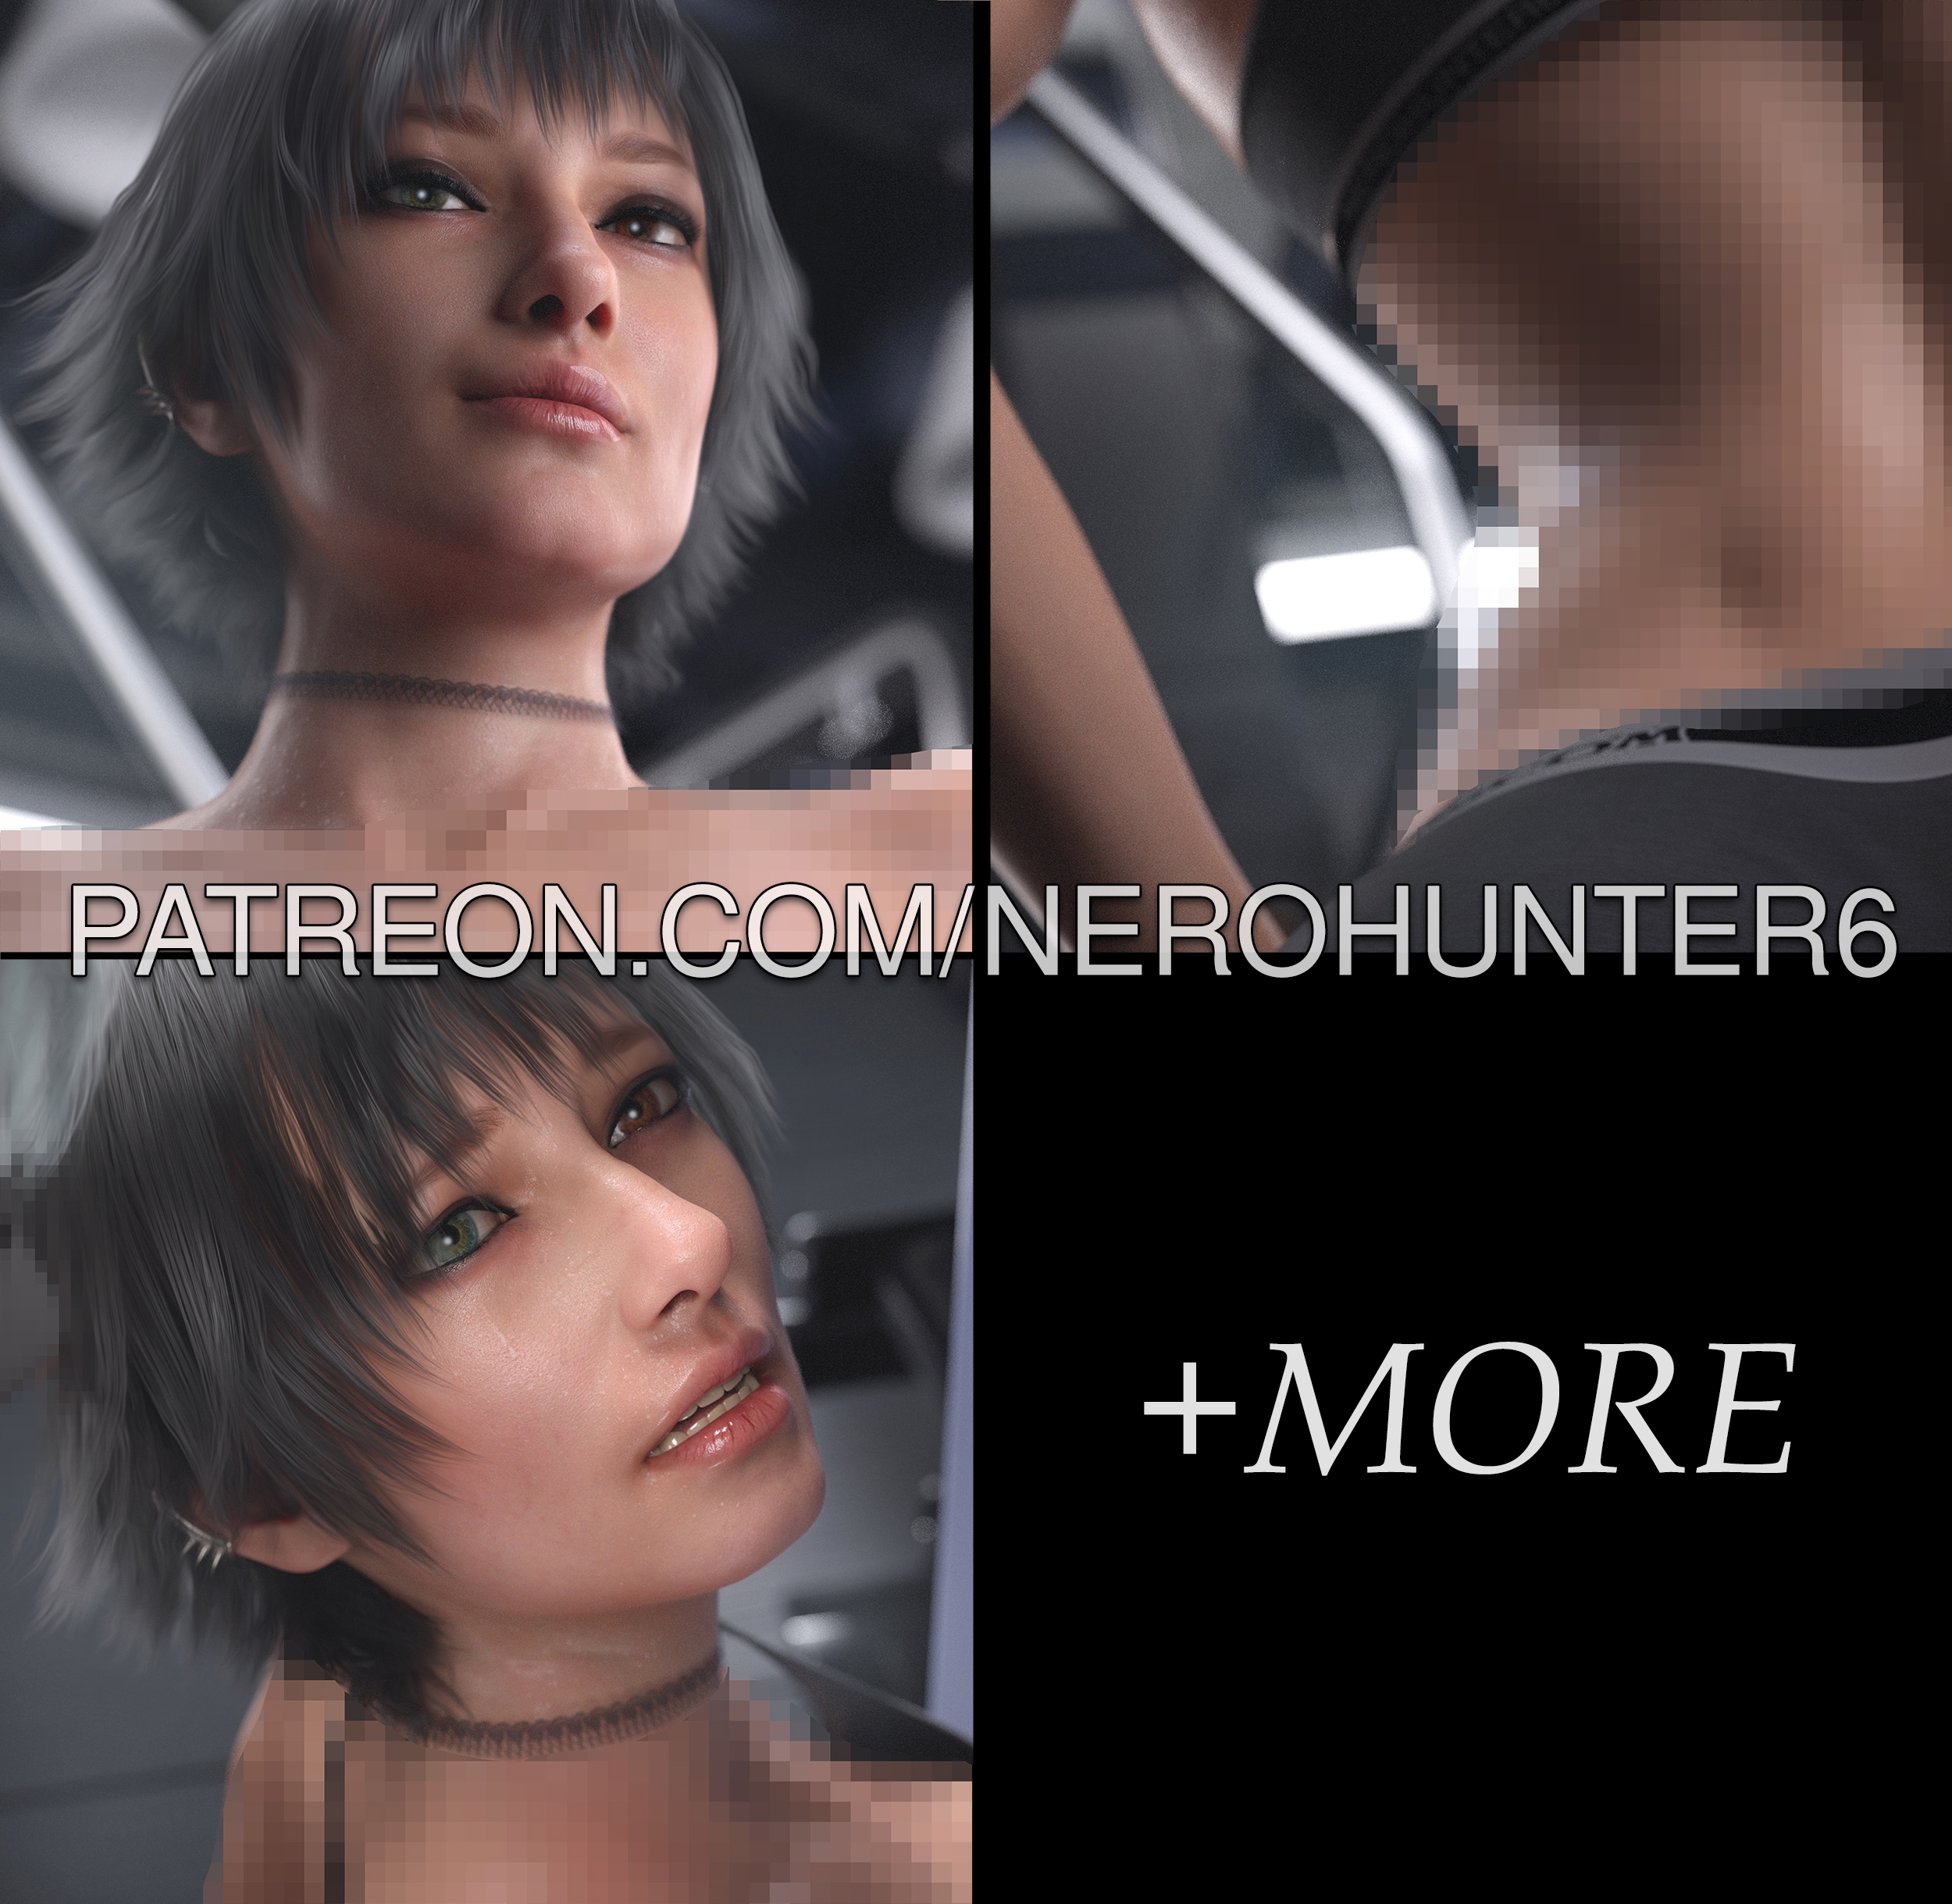 Full set (spicy alts  buttview + super spicy POV) exclusively on Patreon 
https://www.patreon.com/NeroHunter6 
My other socials: 
https://linktr.ee/nerohunter6